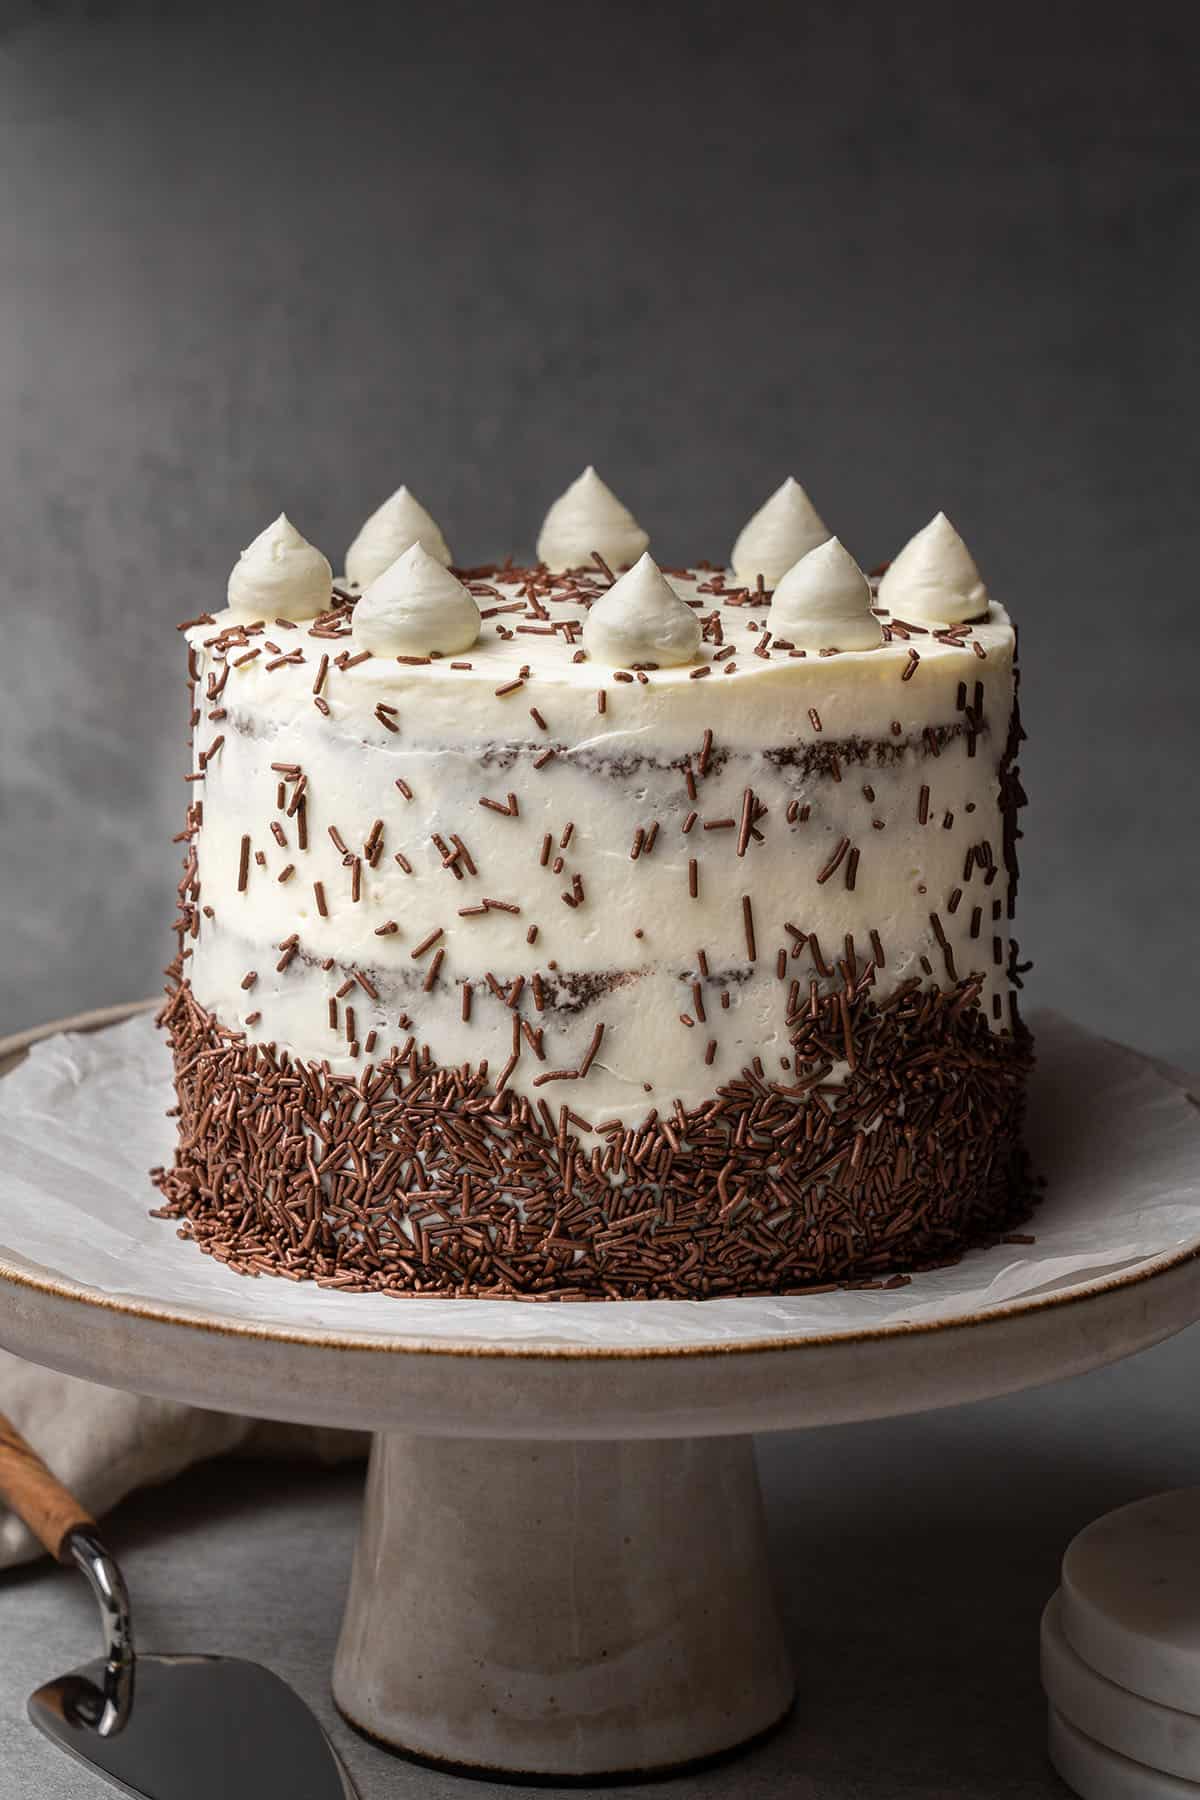 Chocolate cake with cream cheese frosting on a cake stand.